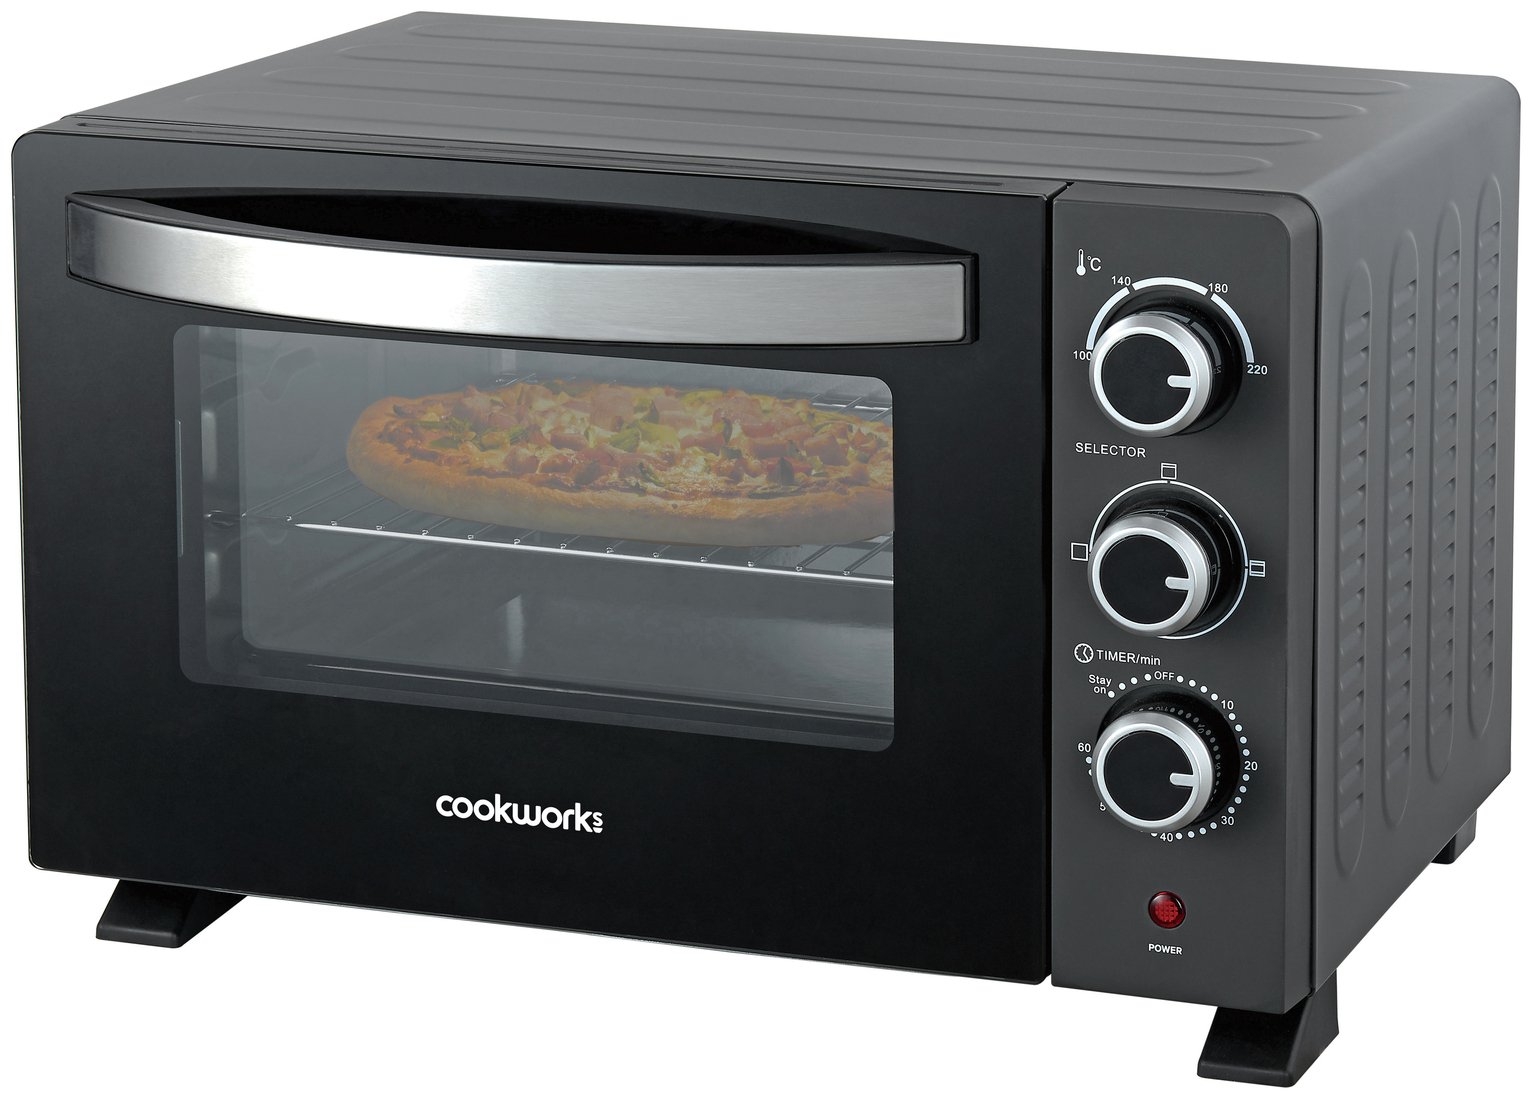 Cookworks 20L Mini Oven and Grill